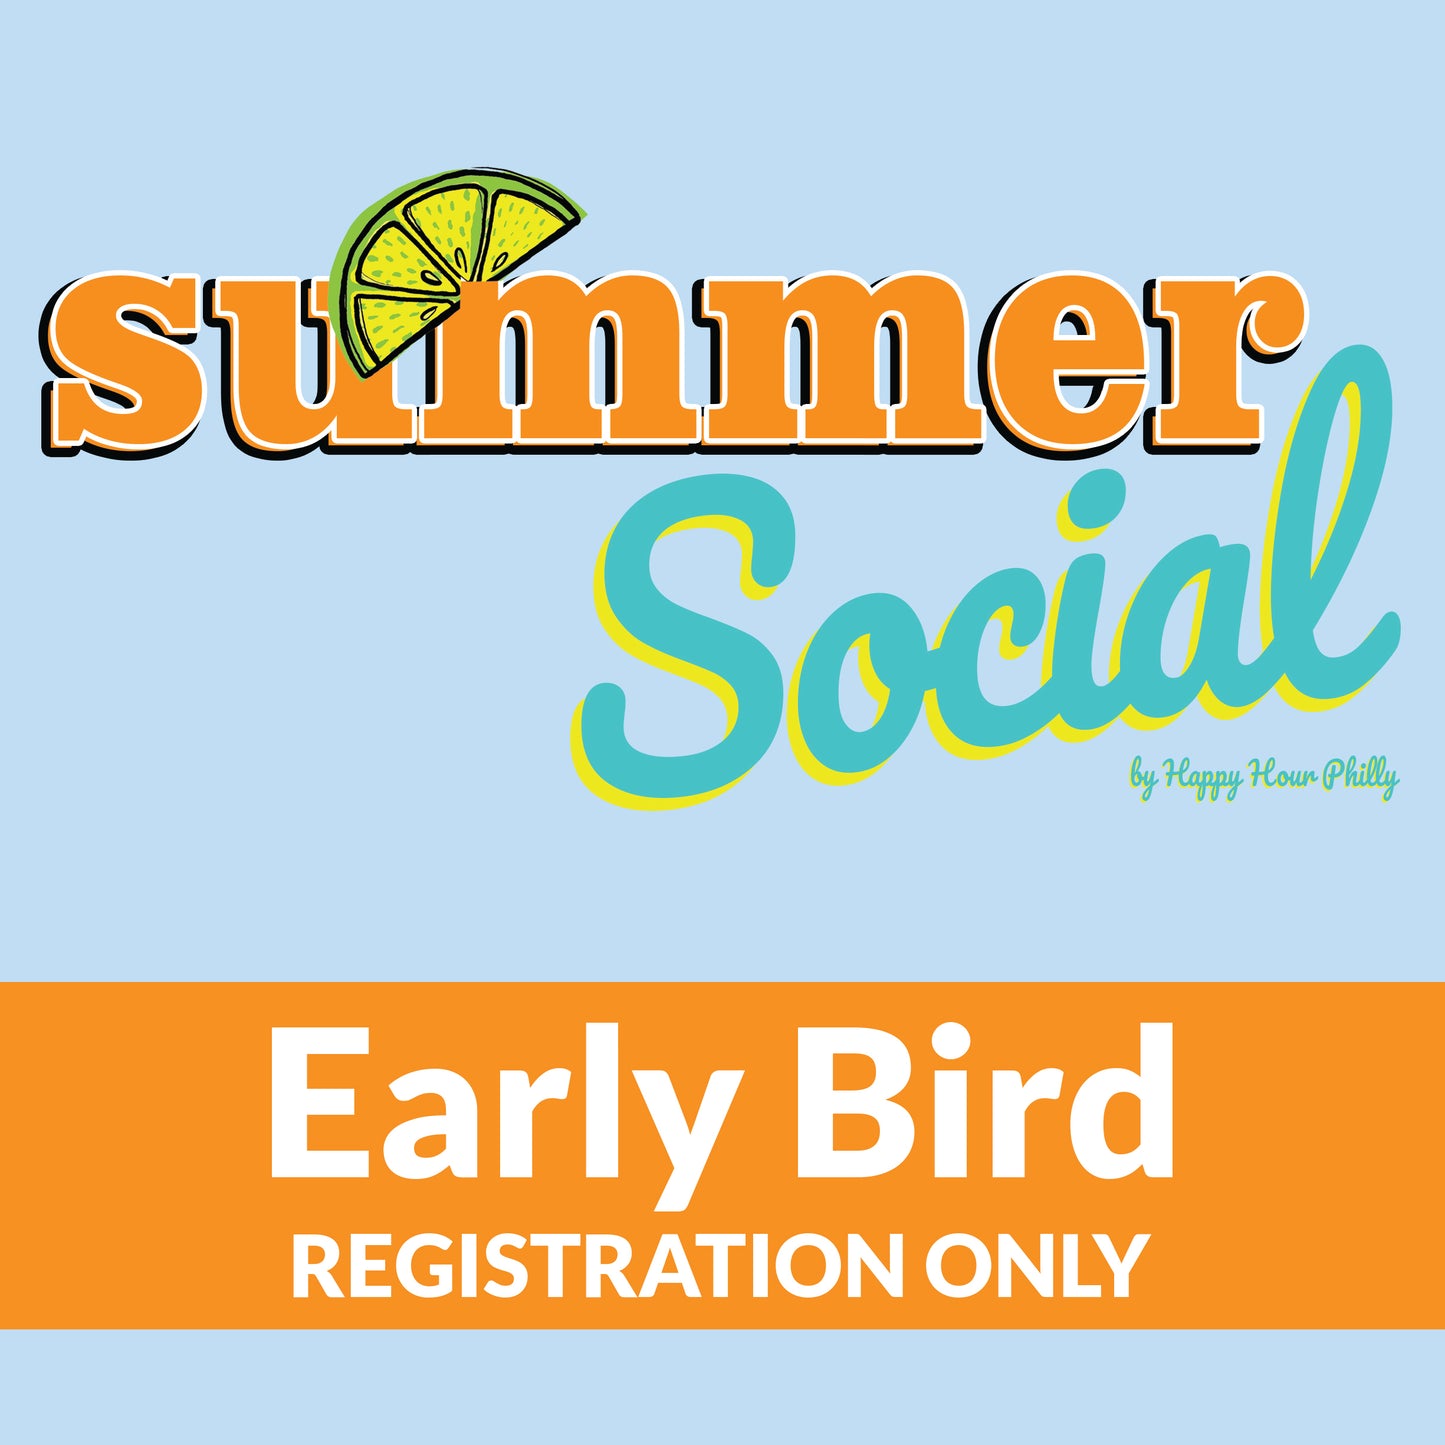 Summer Social - Registration Only Early Bird Pricing